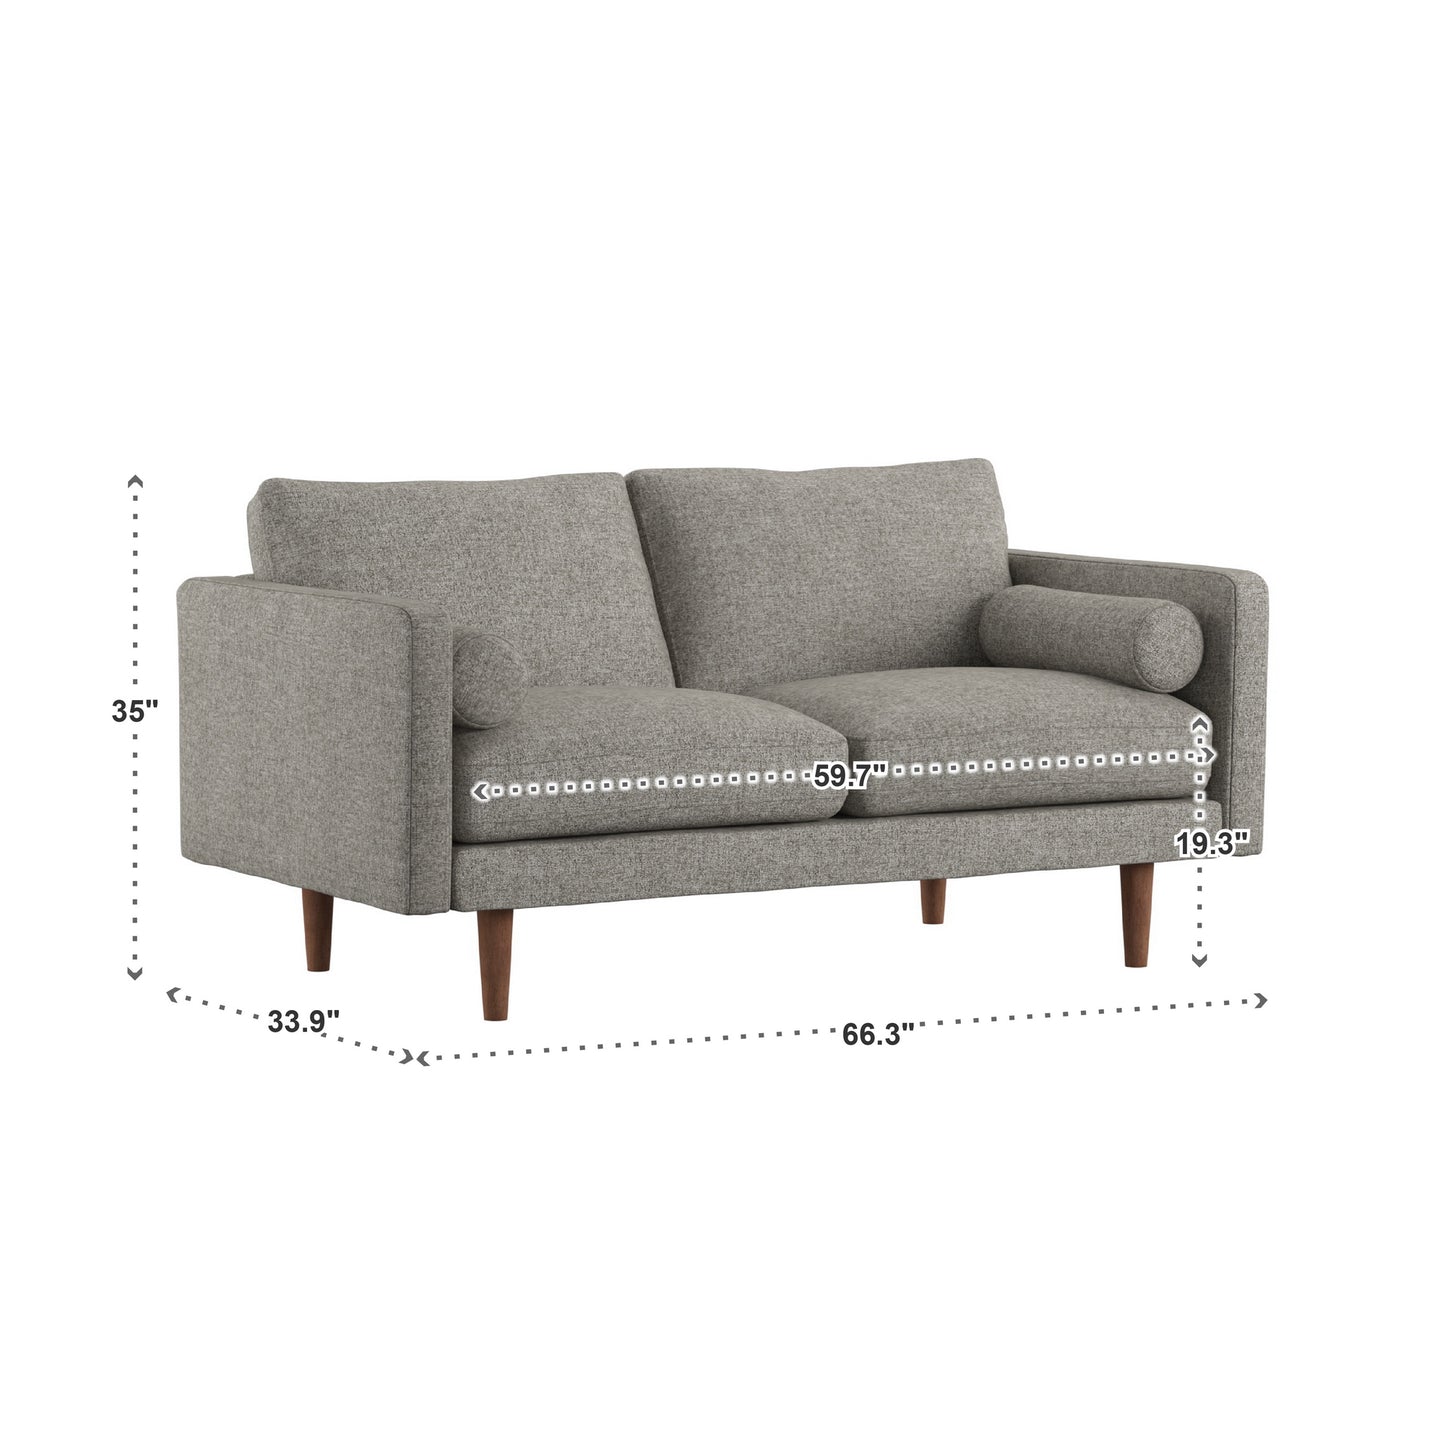 Mid-Century Tapered Leg Loveseat with Pillows - Grey